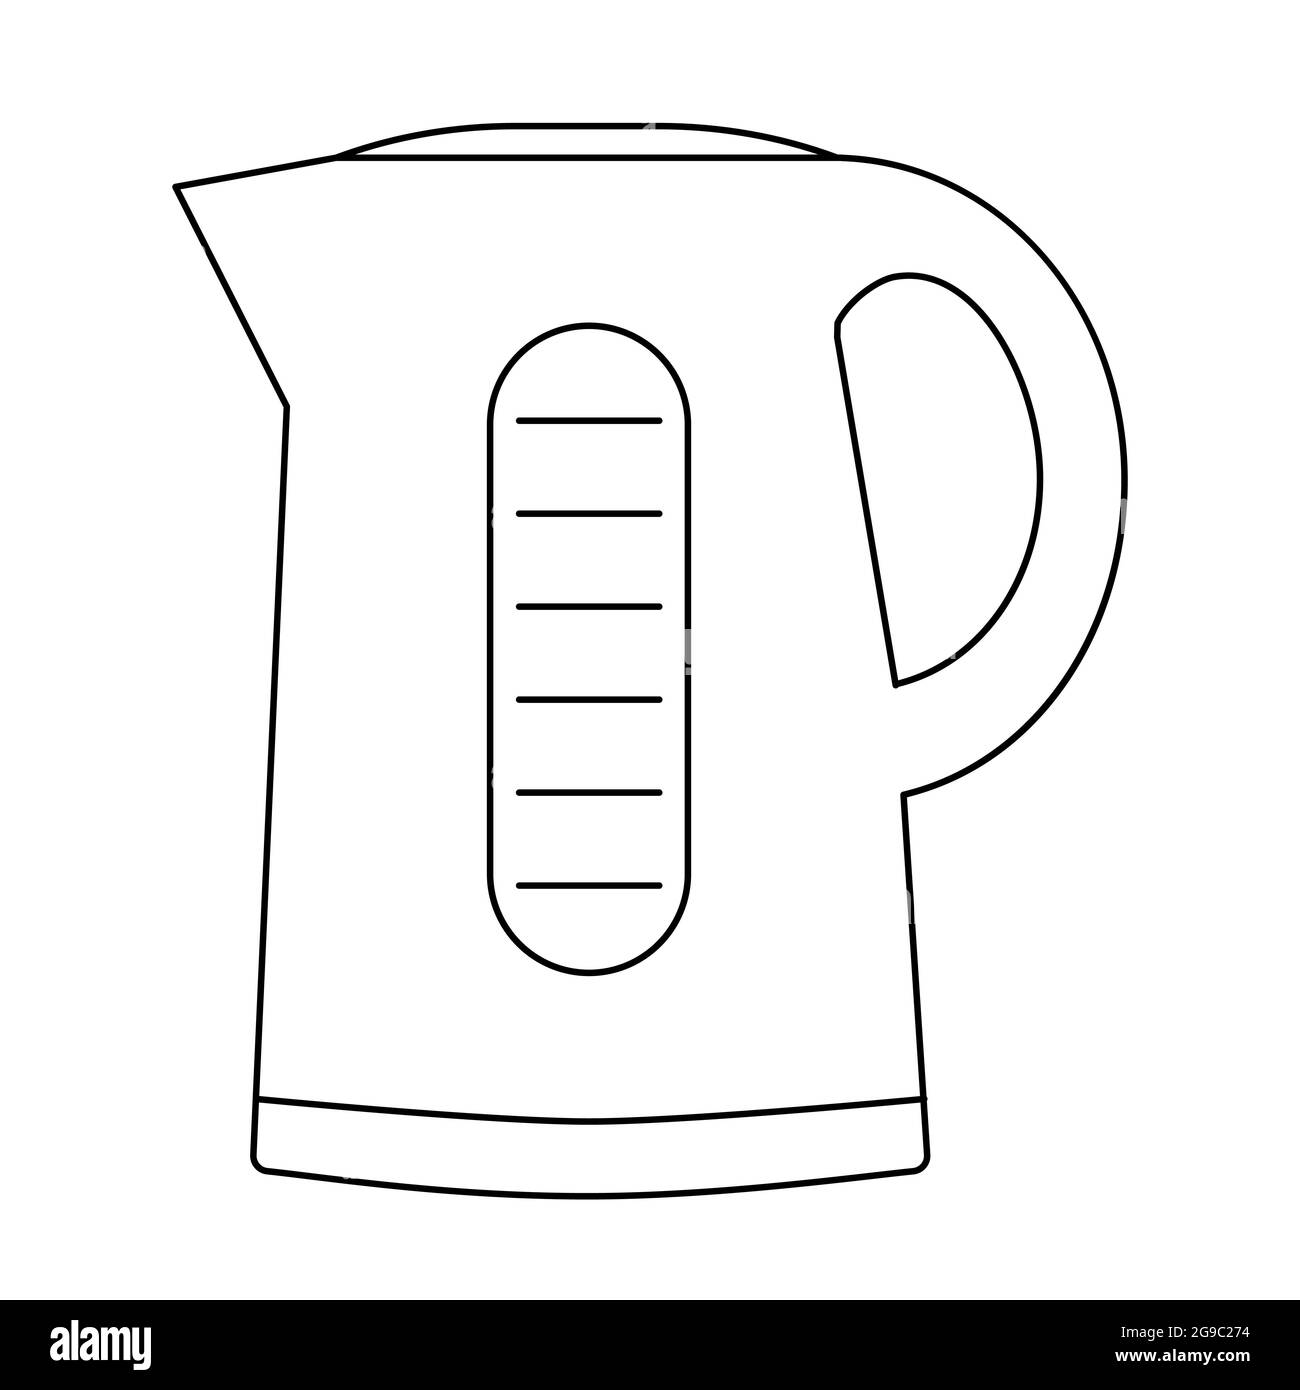 Electric kettle outline icon. Vector illustration. Isolated tea pot. Small appliance for kitchen and home. Household tool sign. Drink preparation equi Stock Vector